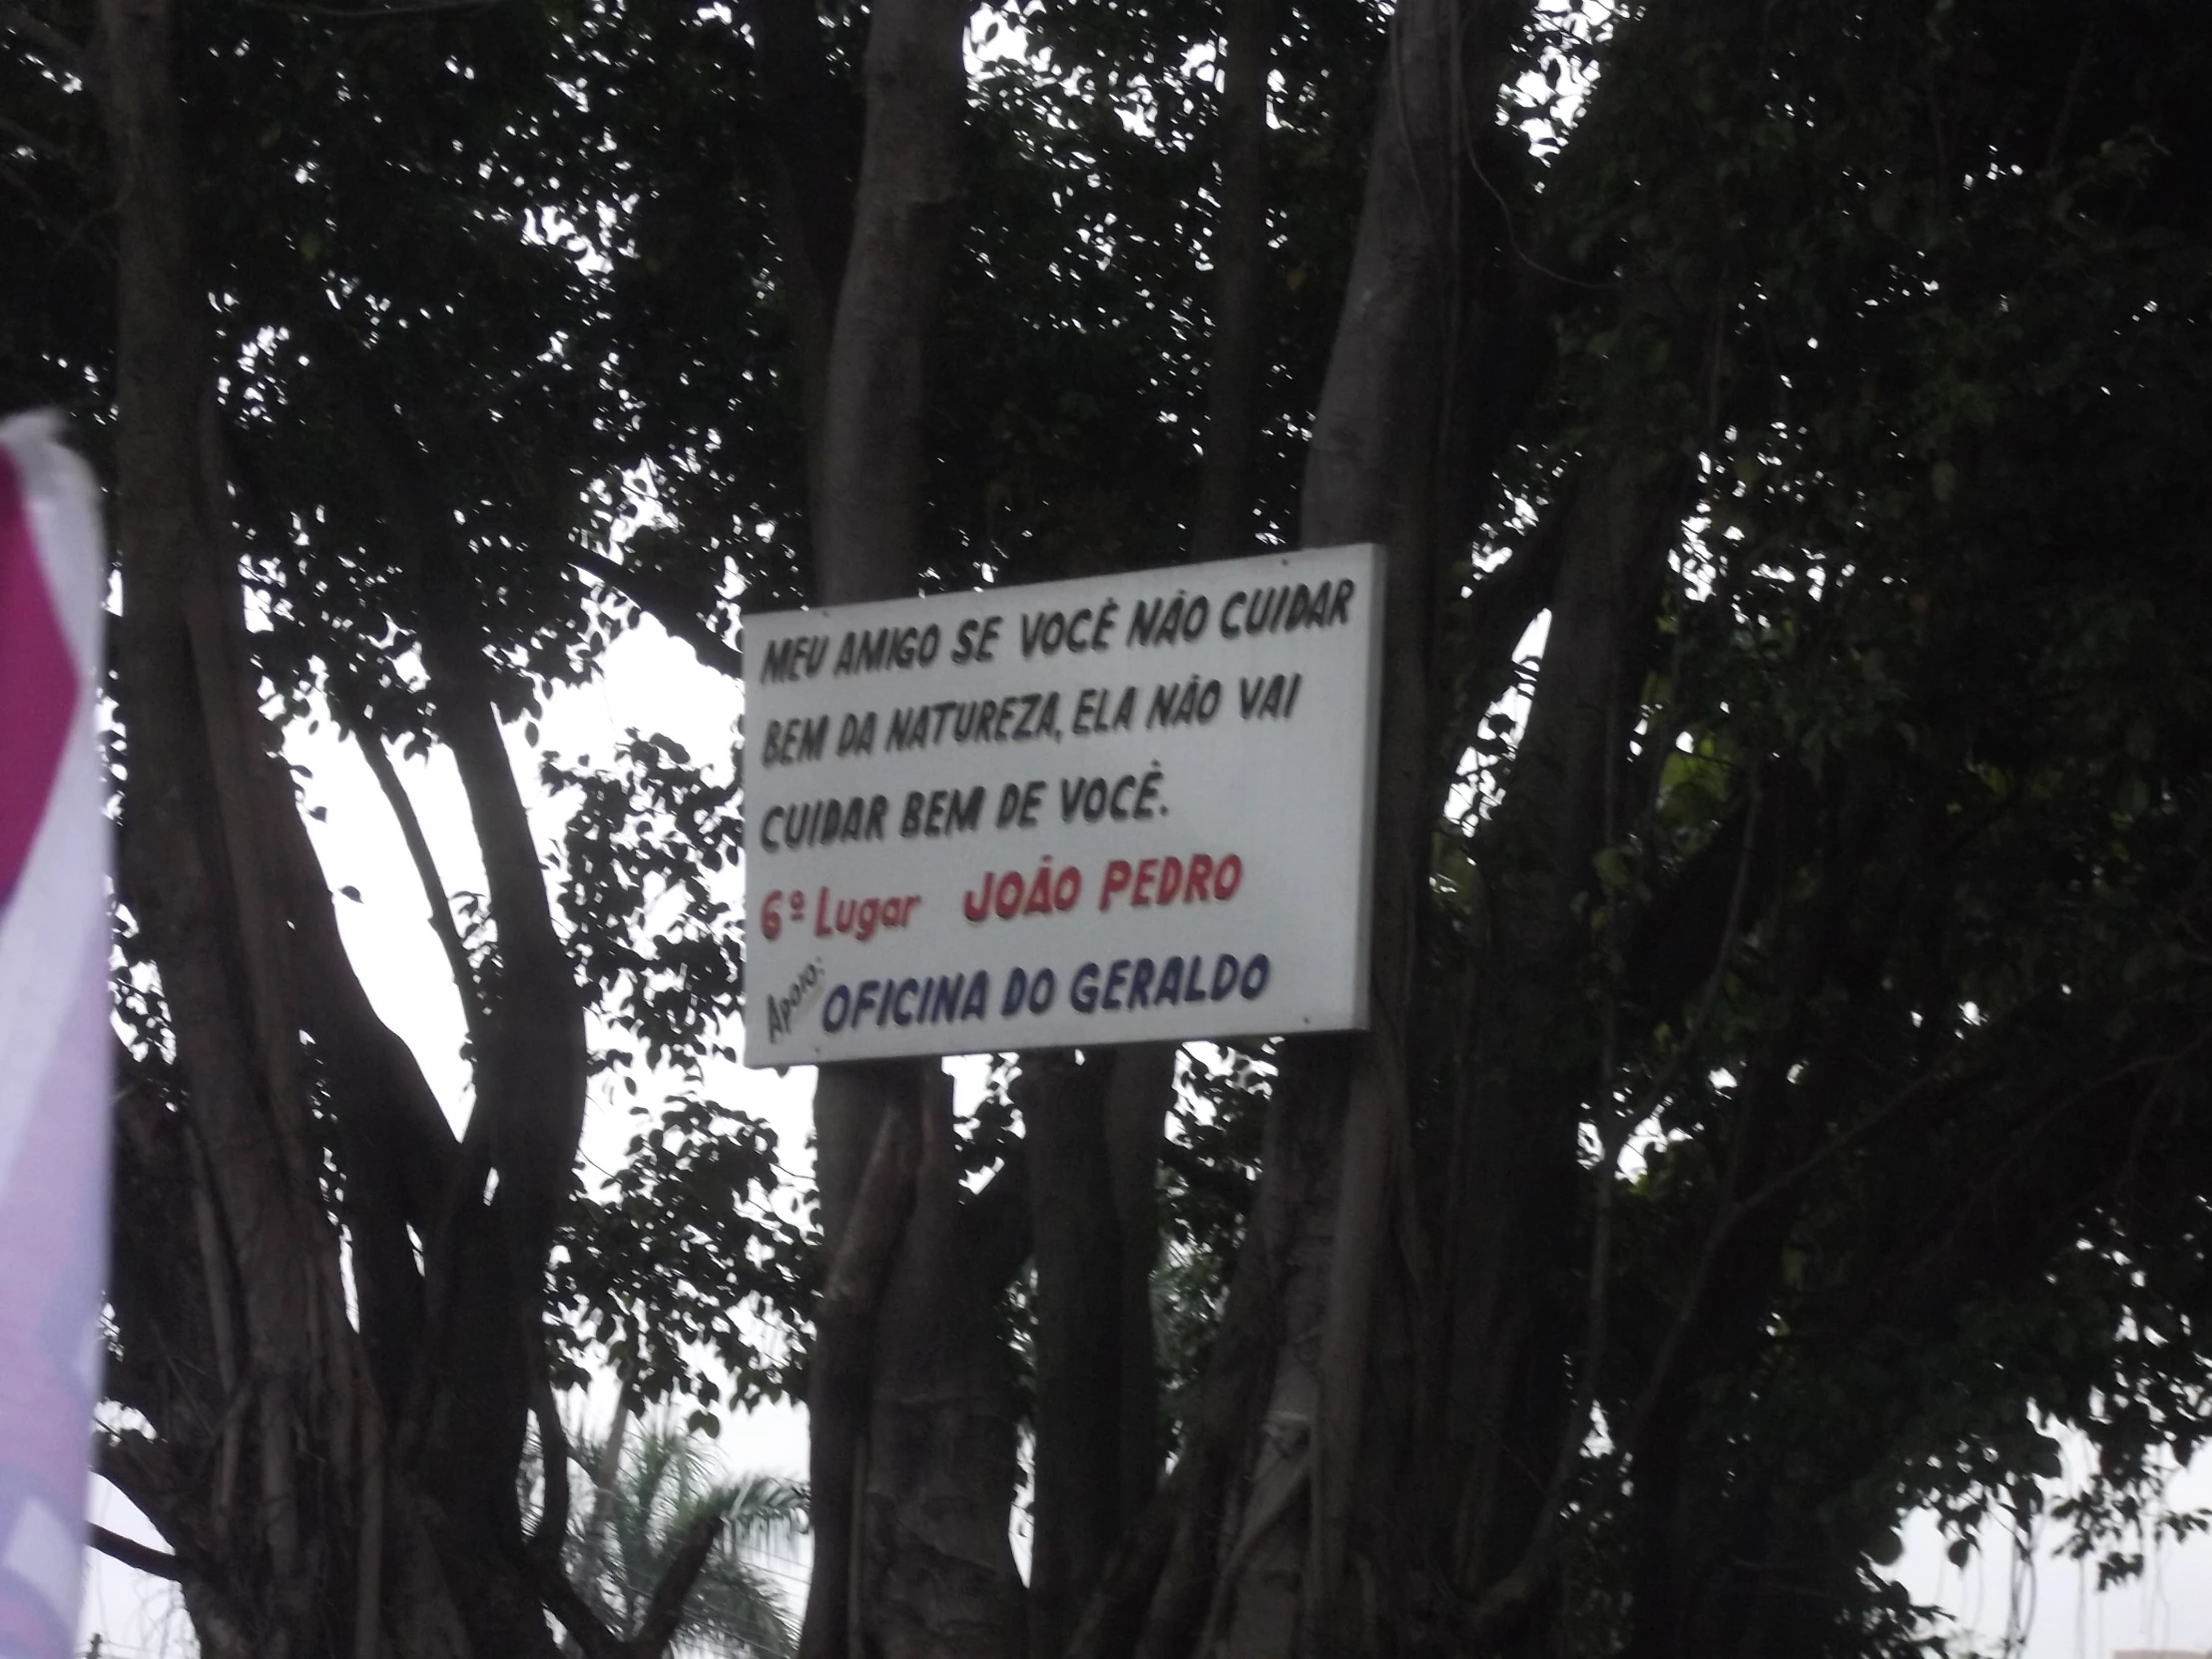 sign posted in tree with american flag nearby